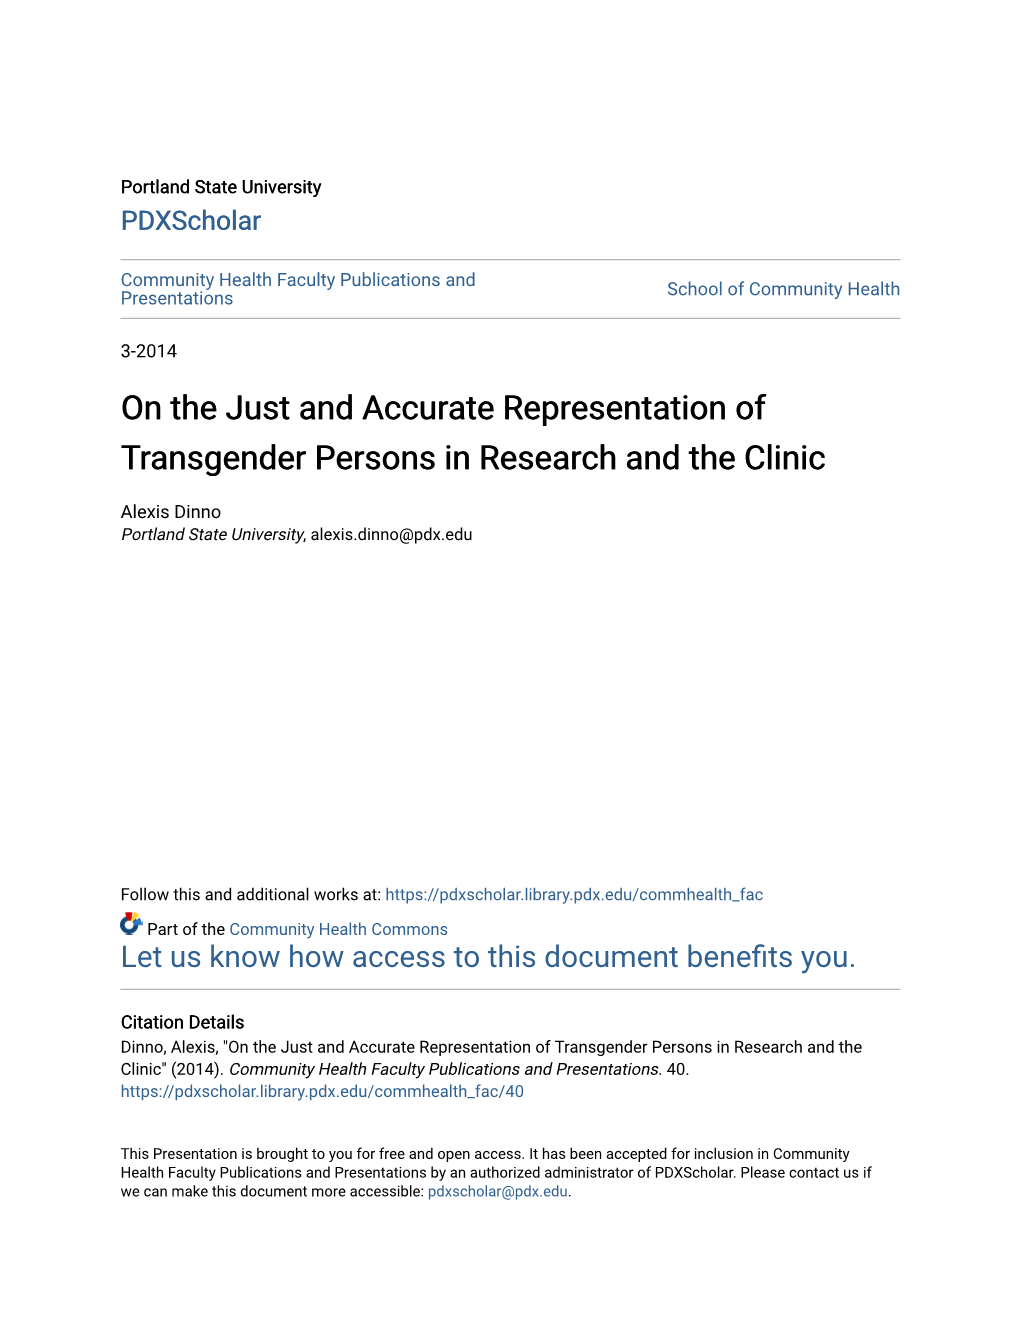 On the Just and Accurate Representation of Transgender Persons in Research and the Clinic